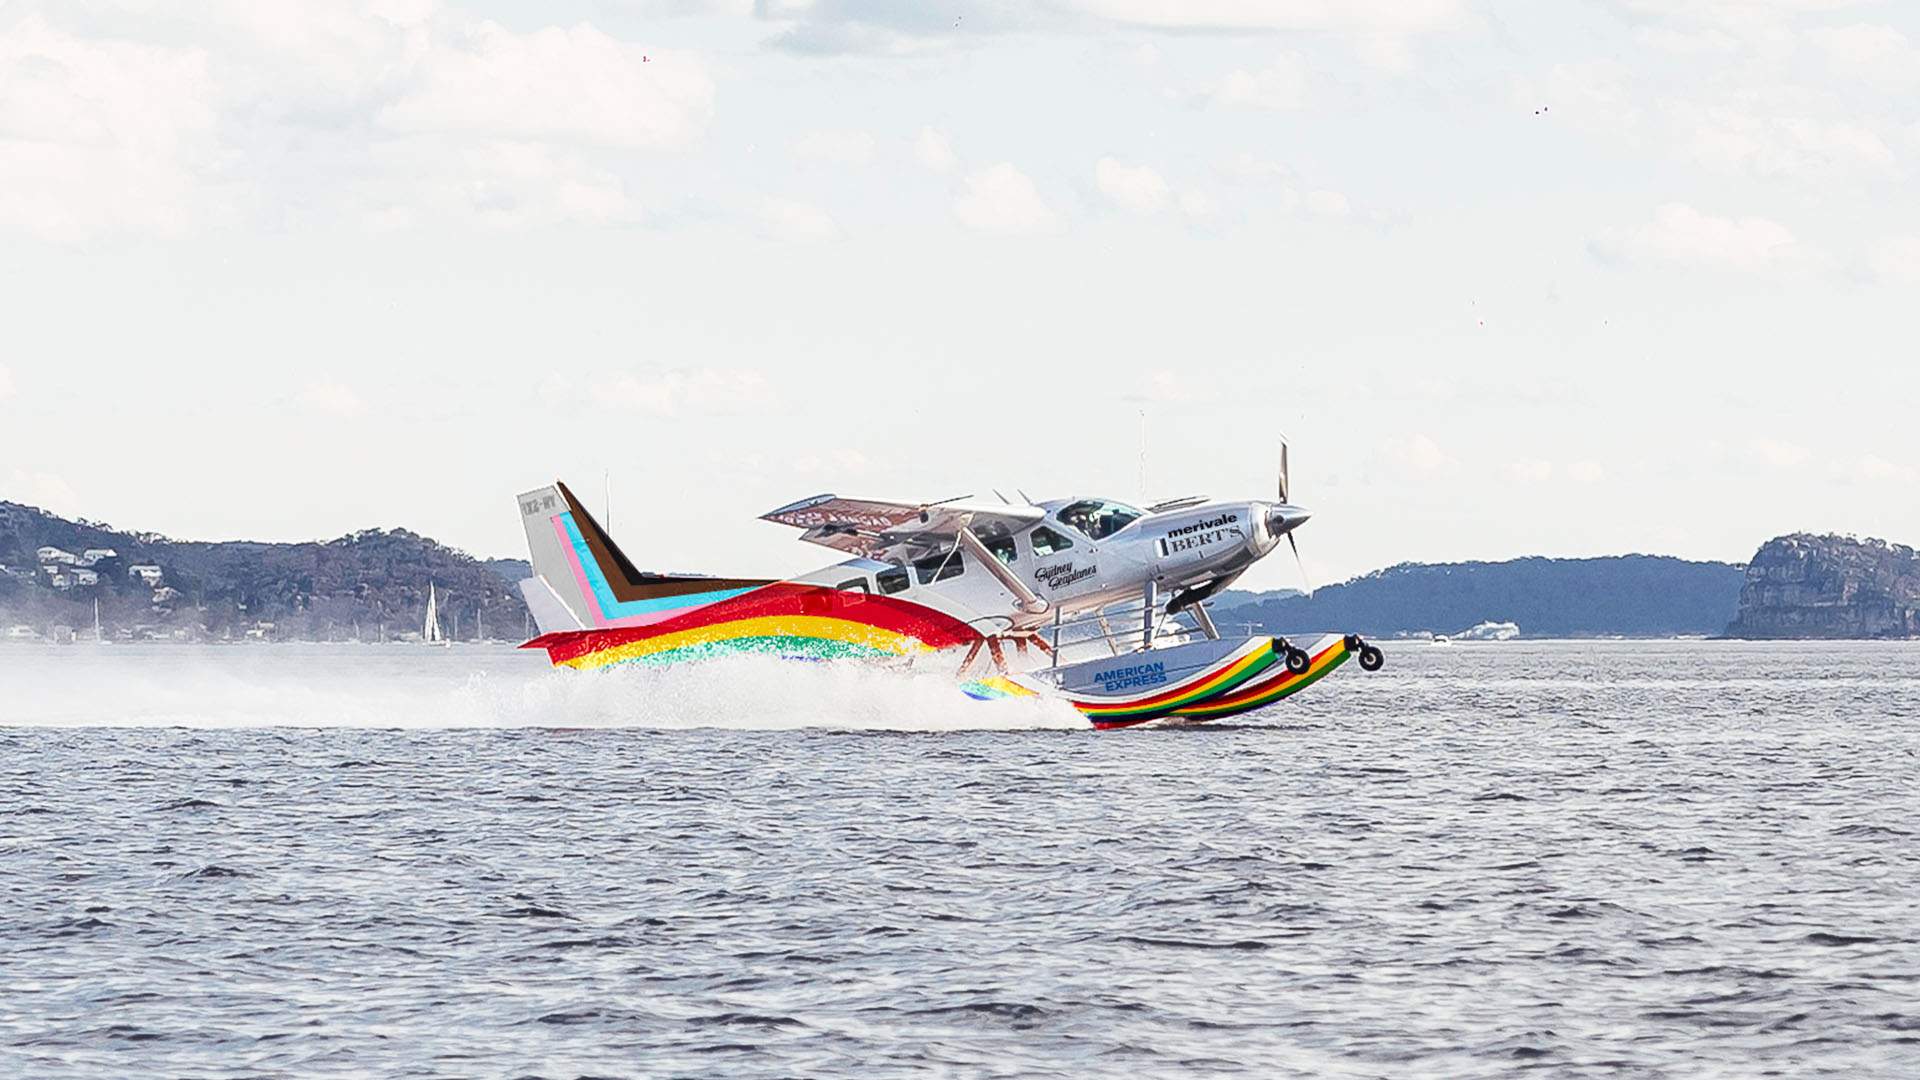 Bert's Pride Plane Is the Most Extravagant WorldPride Experience You Can Book